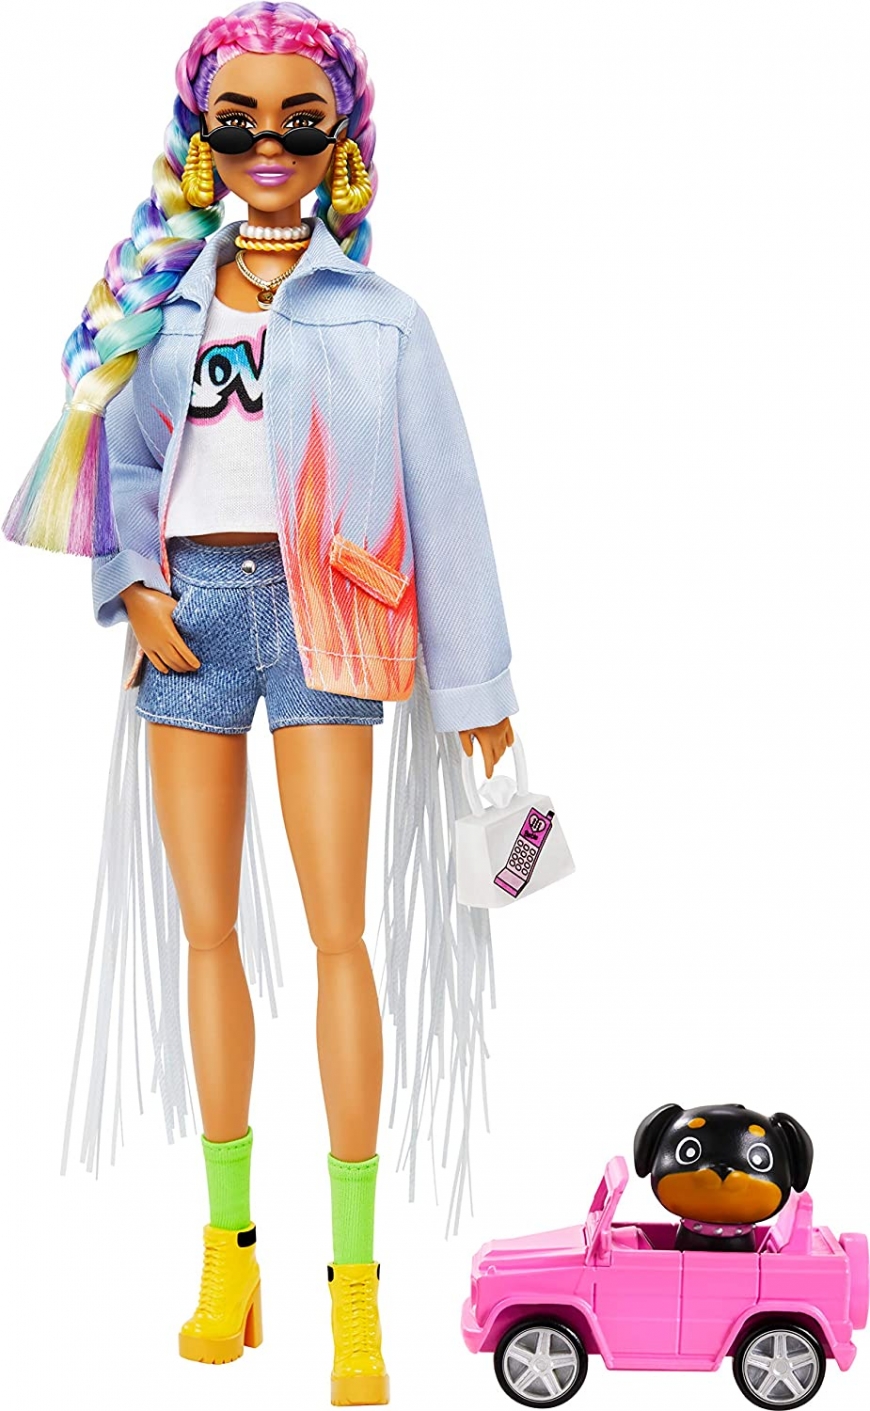 Barbie Extra Doll №5 in Long-Fringe Denim Jacket with Pet Puppy with  Rainbow Braids